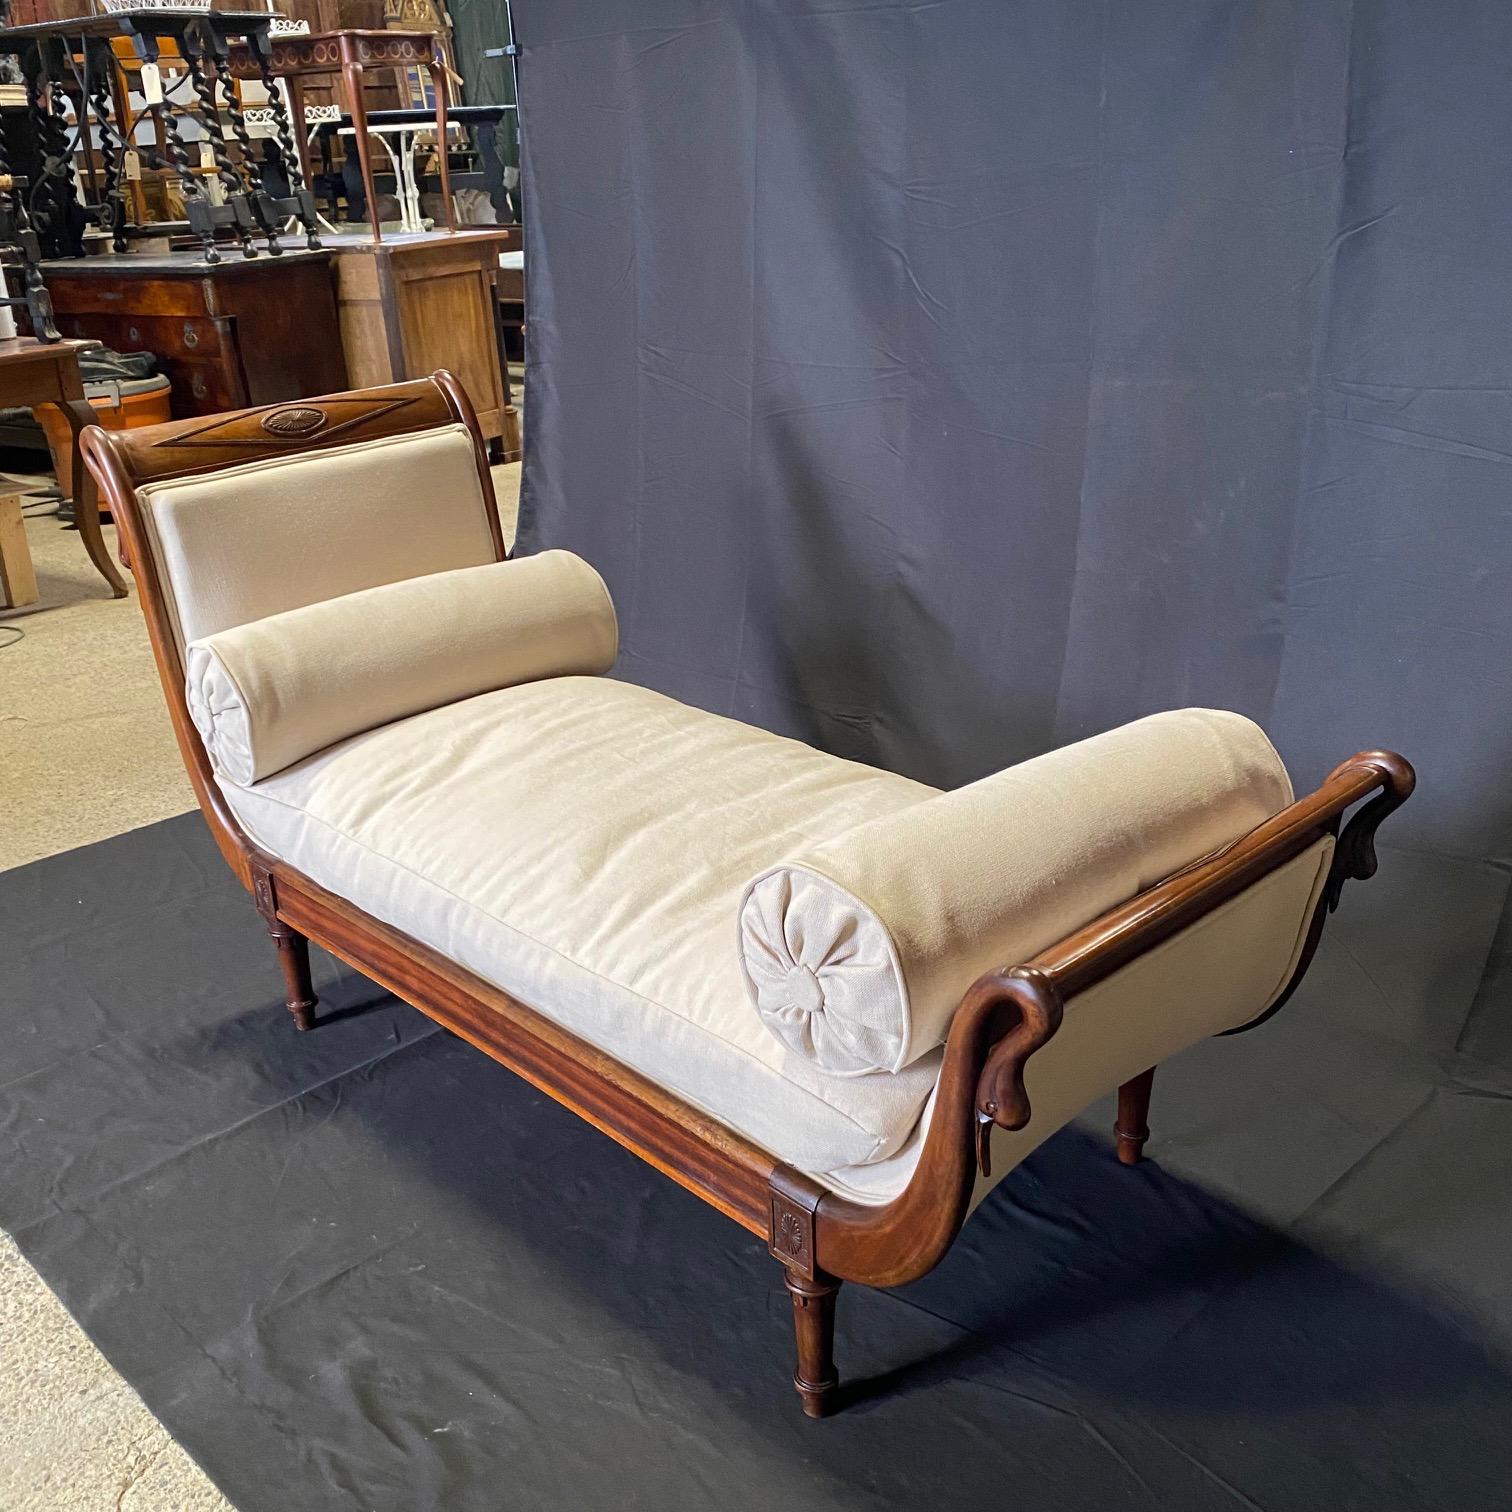 Elegant 19th century French Empire walnut daybed or chaise lounge featuring carved swan neck ends. The cushioned seat is within padded ends of unequal height with gilded swan necked facing boards having diamond crests on each end over a paneled